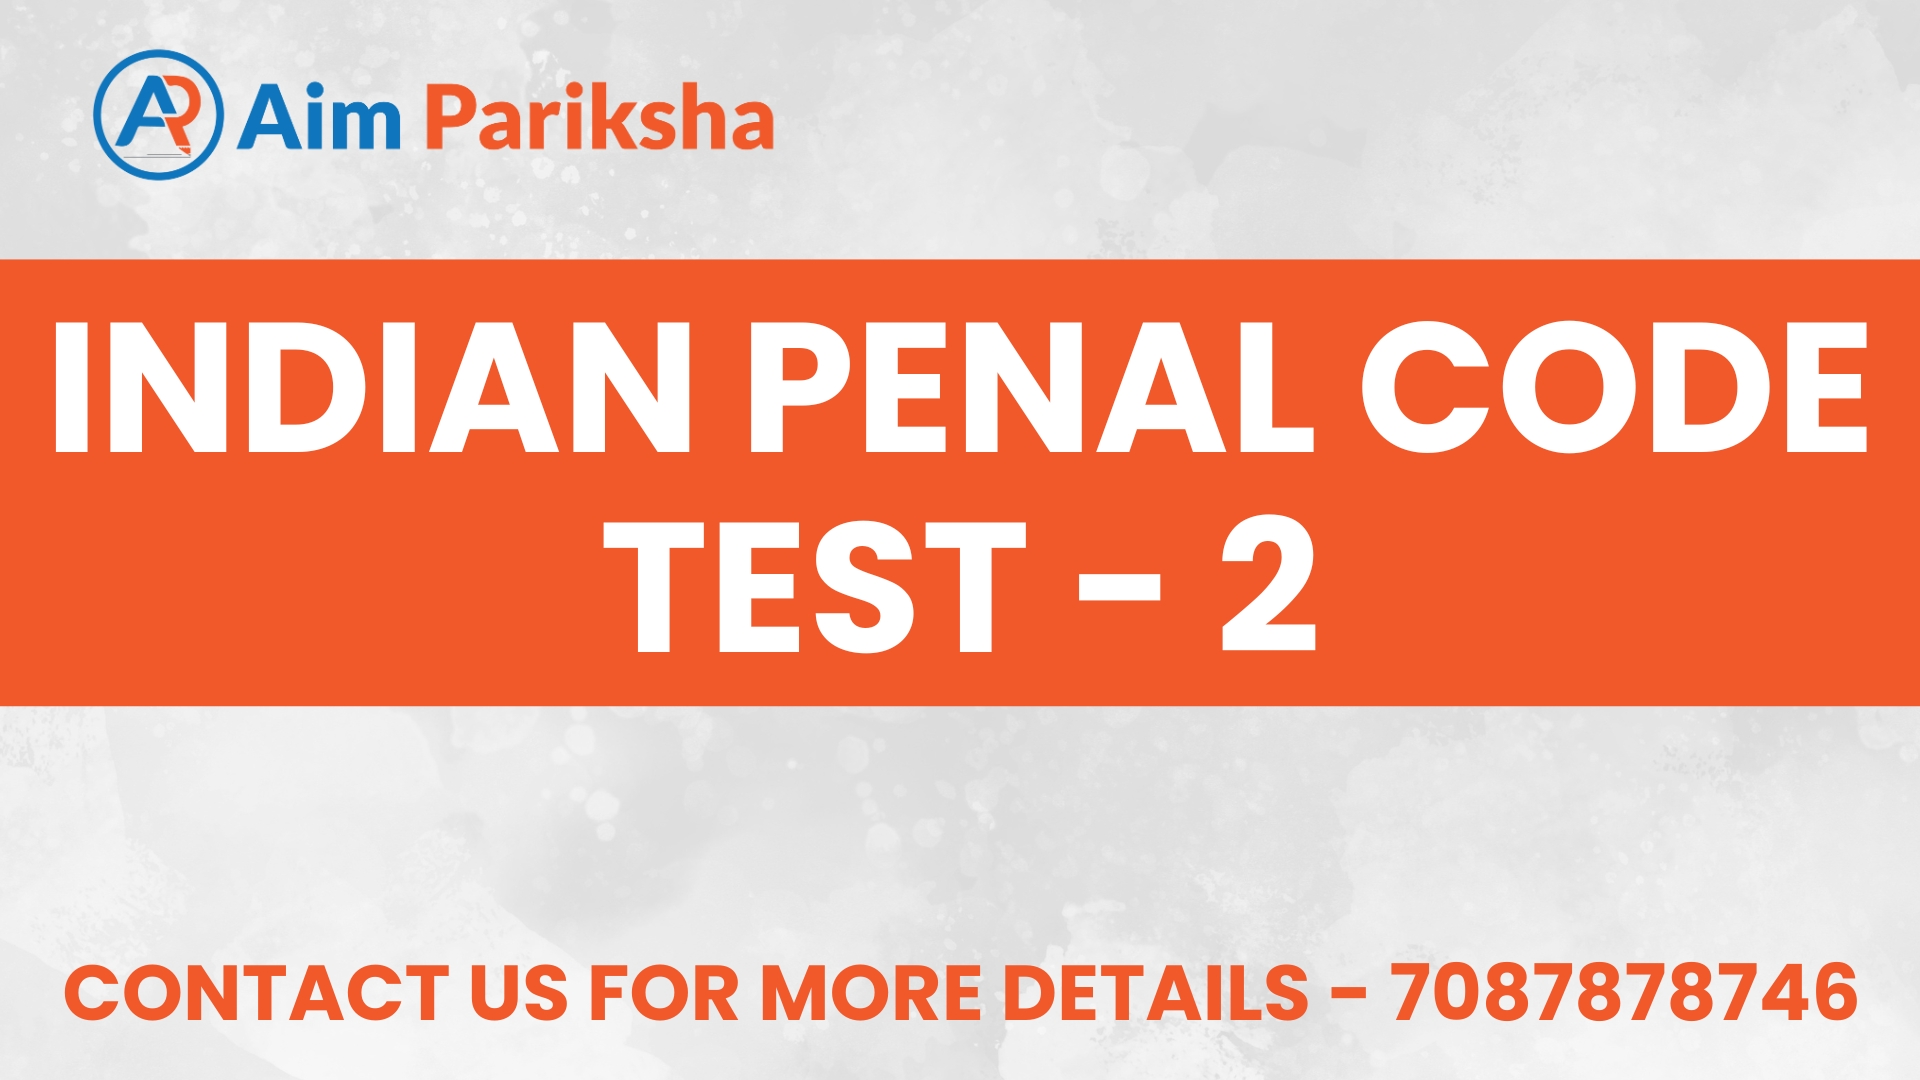 Indian Penal Code Test - 2